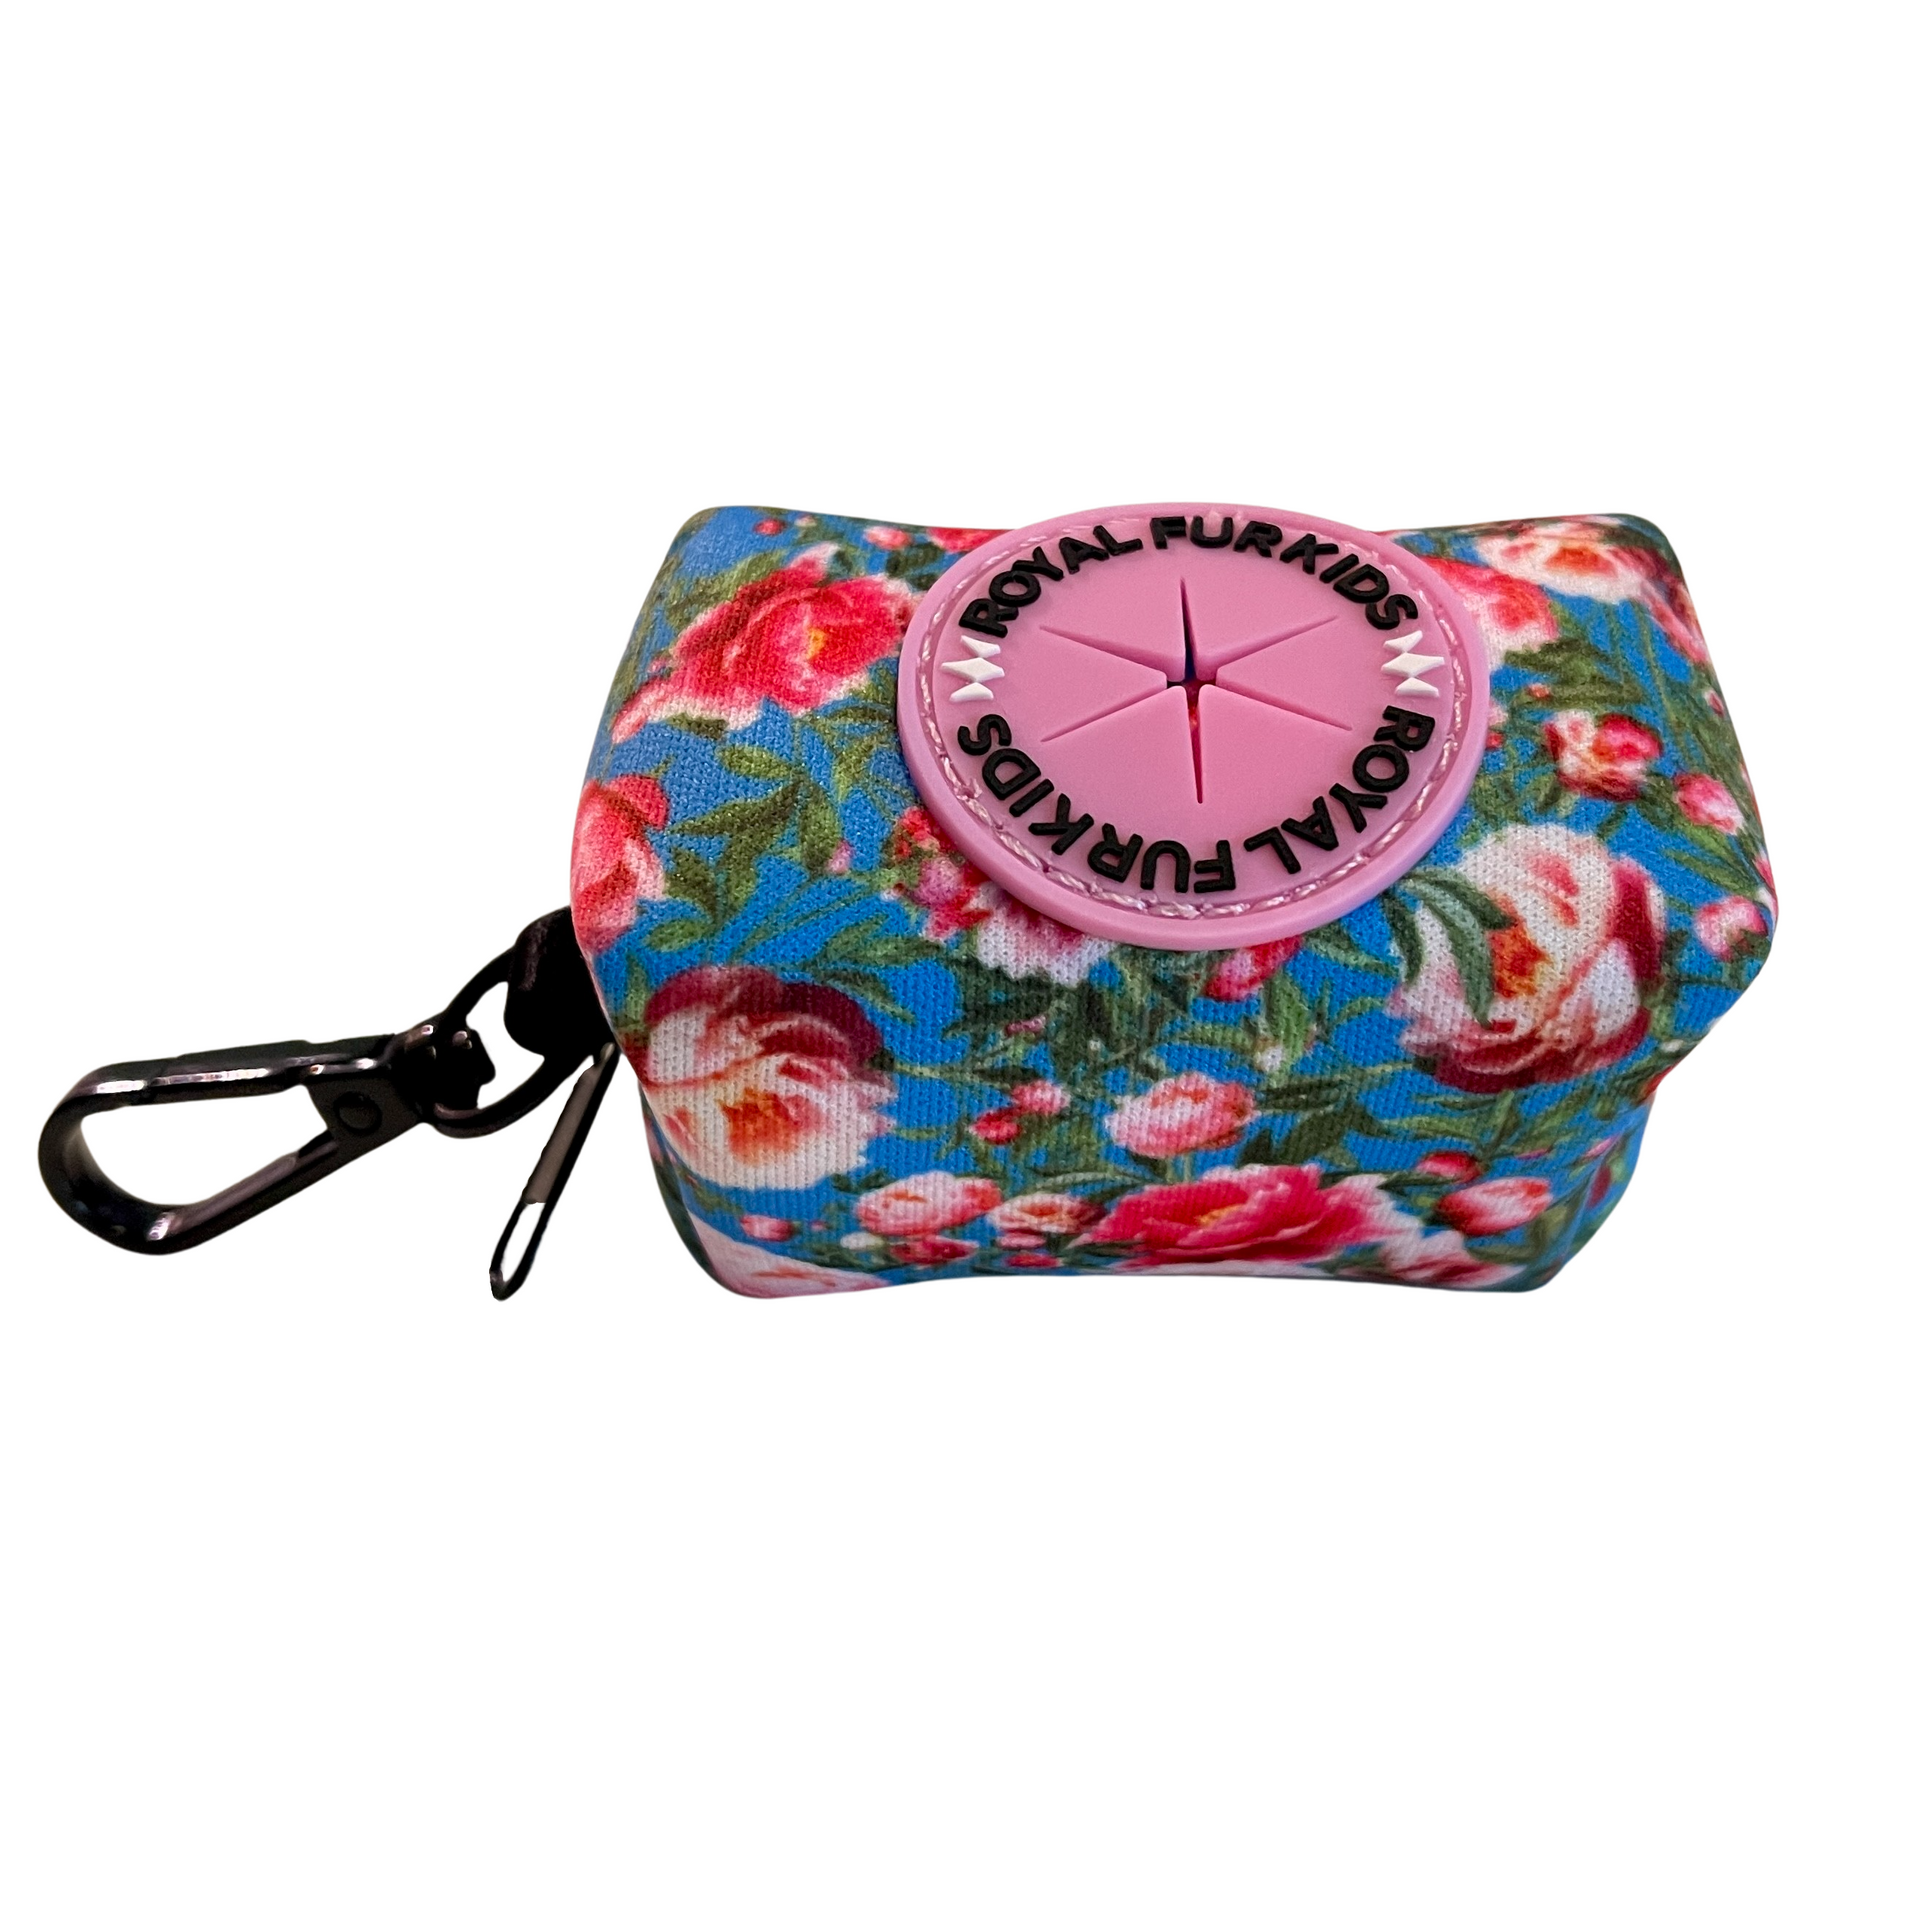 The Rose Collection Poop Bag